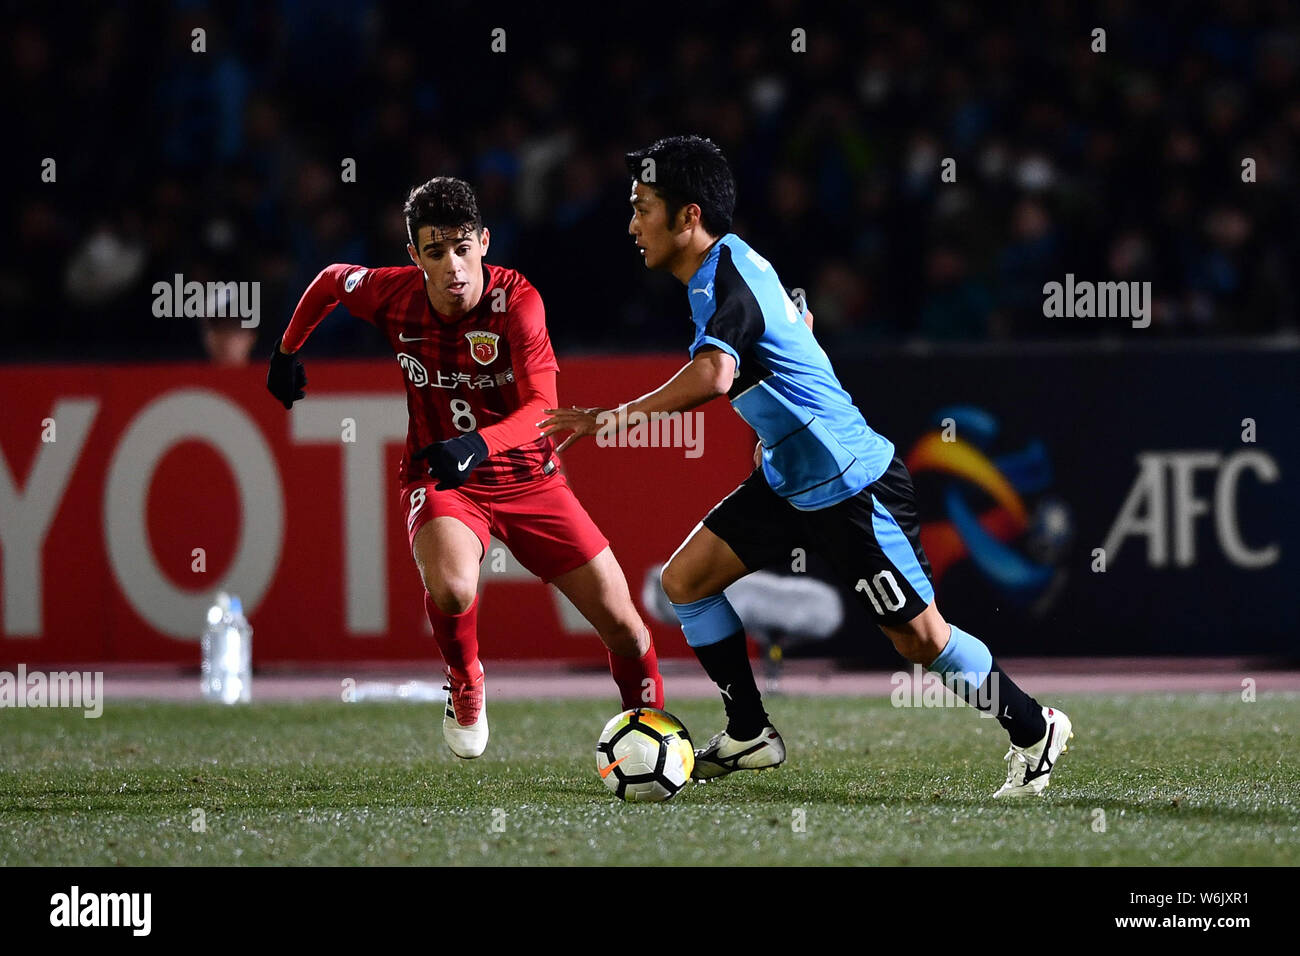 Brazilian football player Oscar, left, of China's Shanghai SIPG challenges Ryota Oshima of Japan's Kawasaki Frontale in their Group F match during the Stock Photo